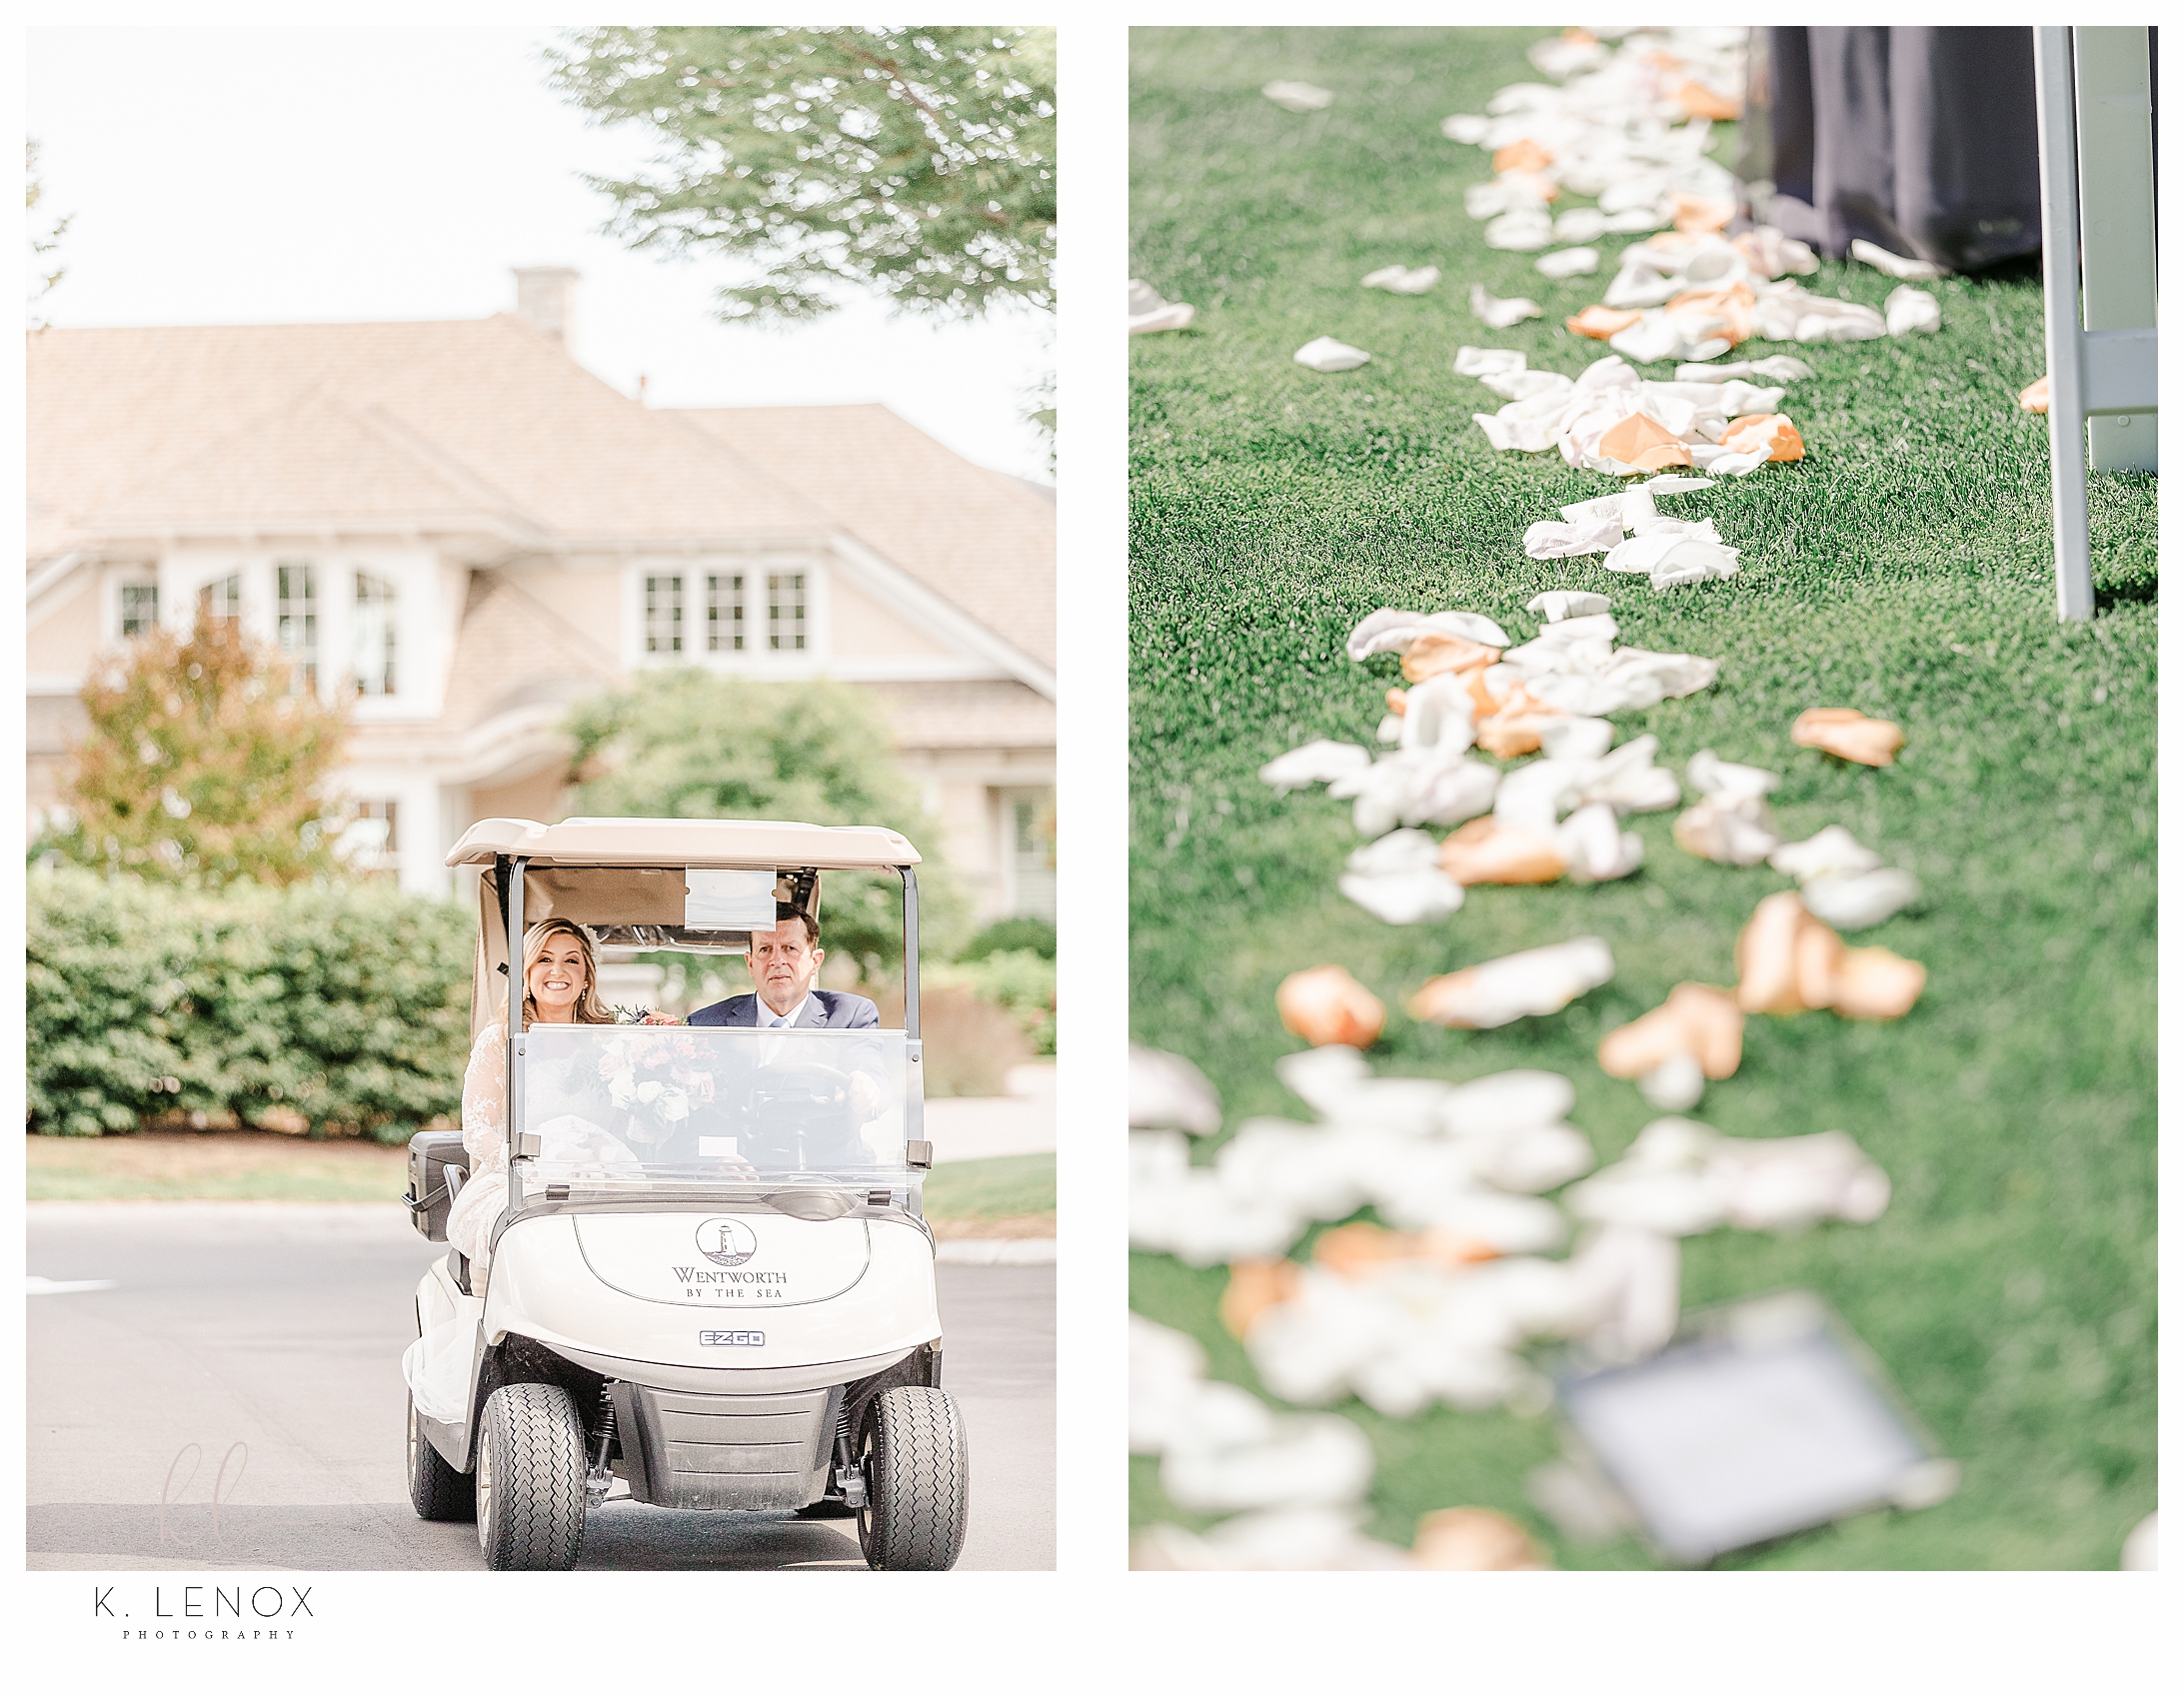 Wedding Ceremony at the Wentworth Country club in Portsmouth NH.  Bride rides in Golf cart before the ceremony. 